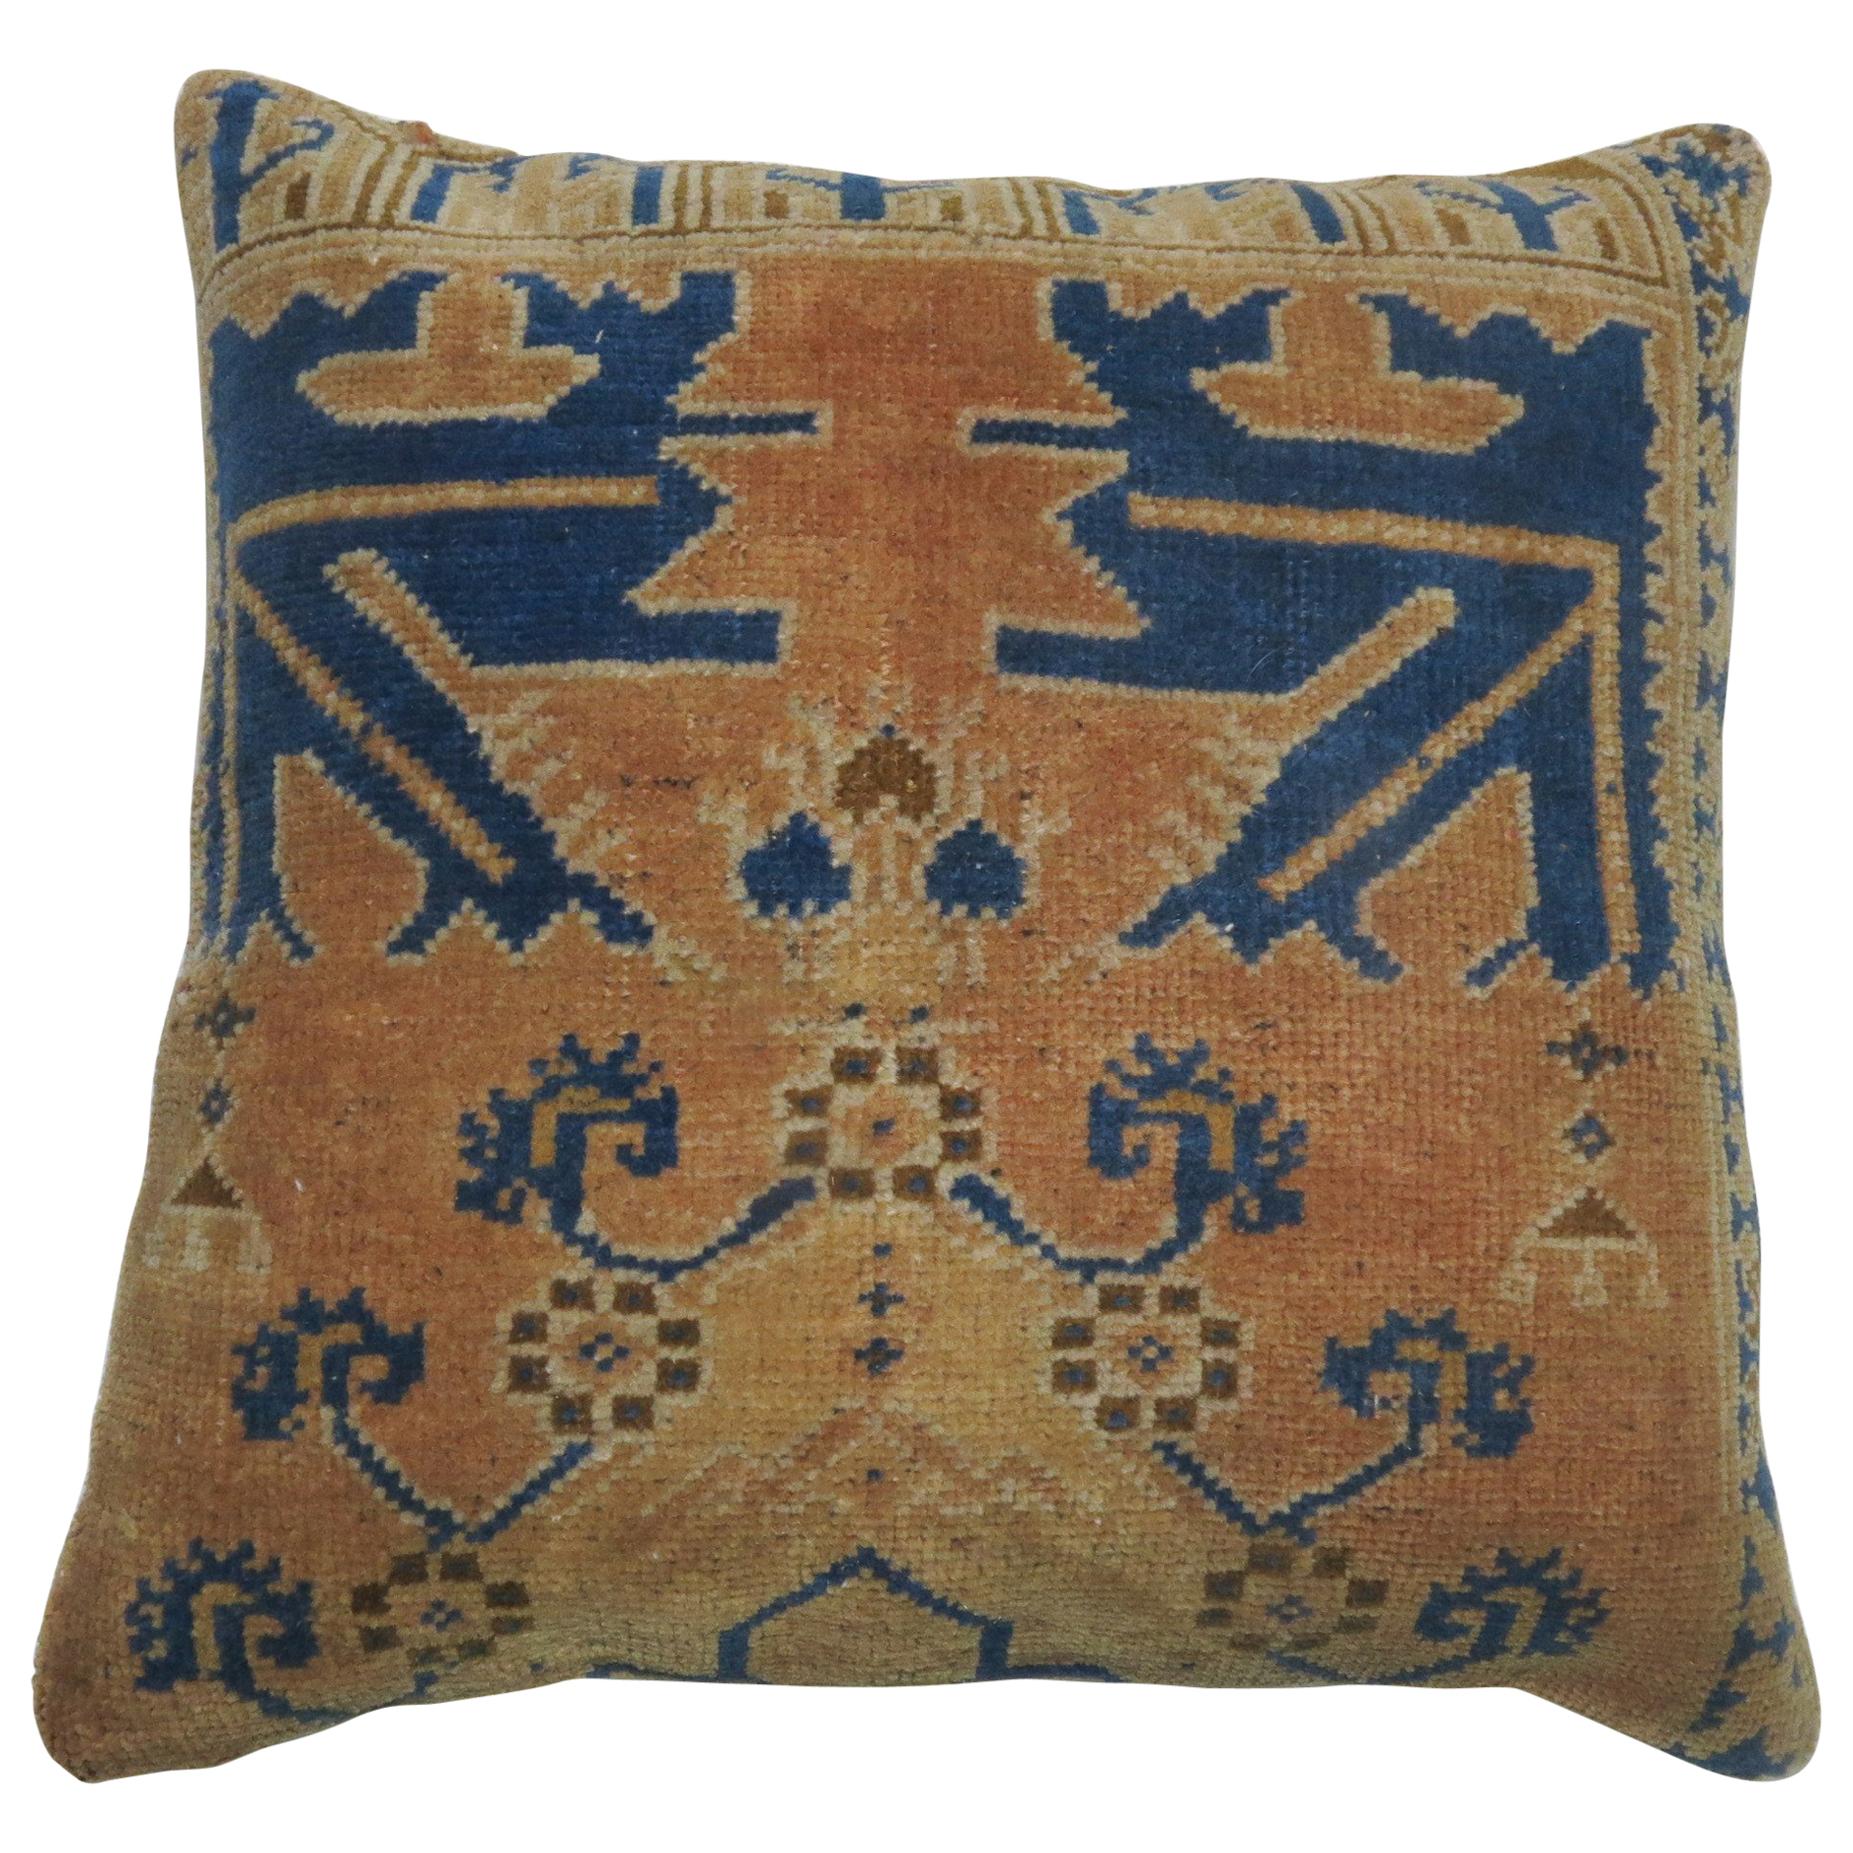 Vintage Turkish Blue and Peach Rug Pillow